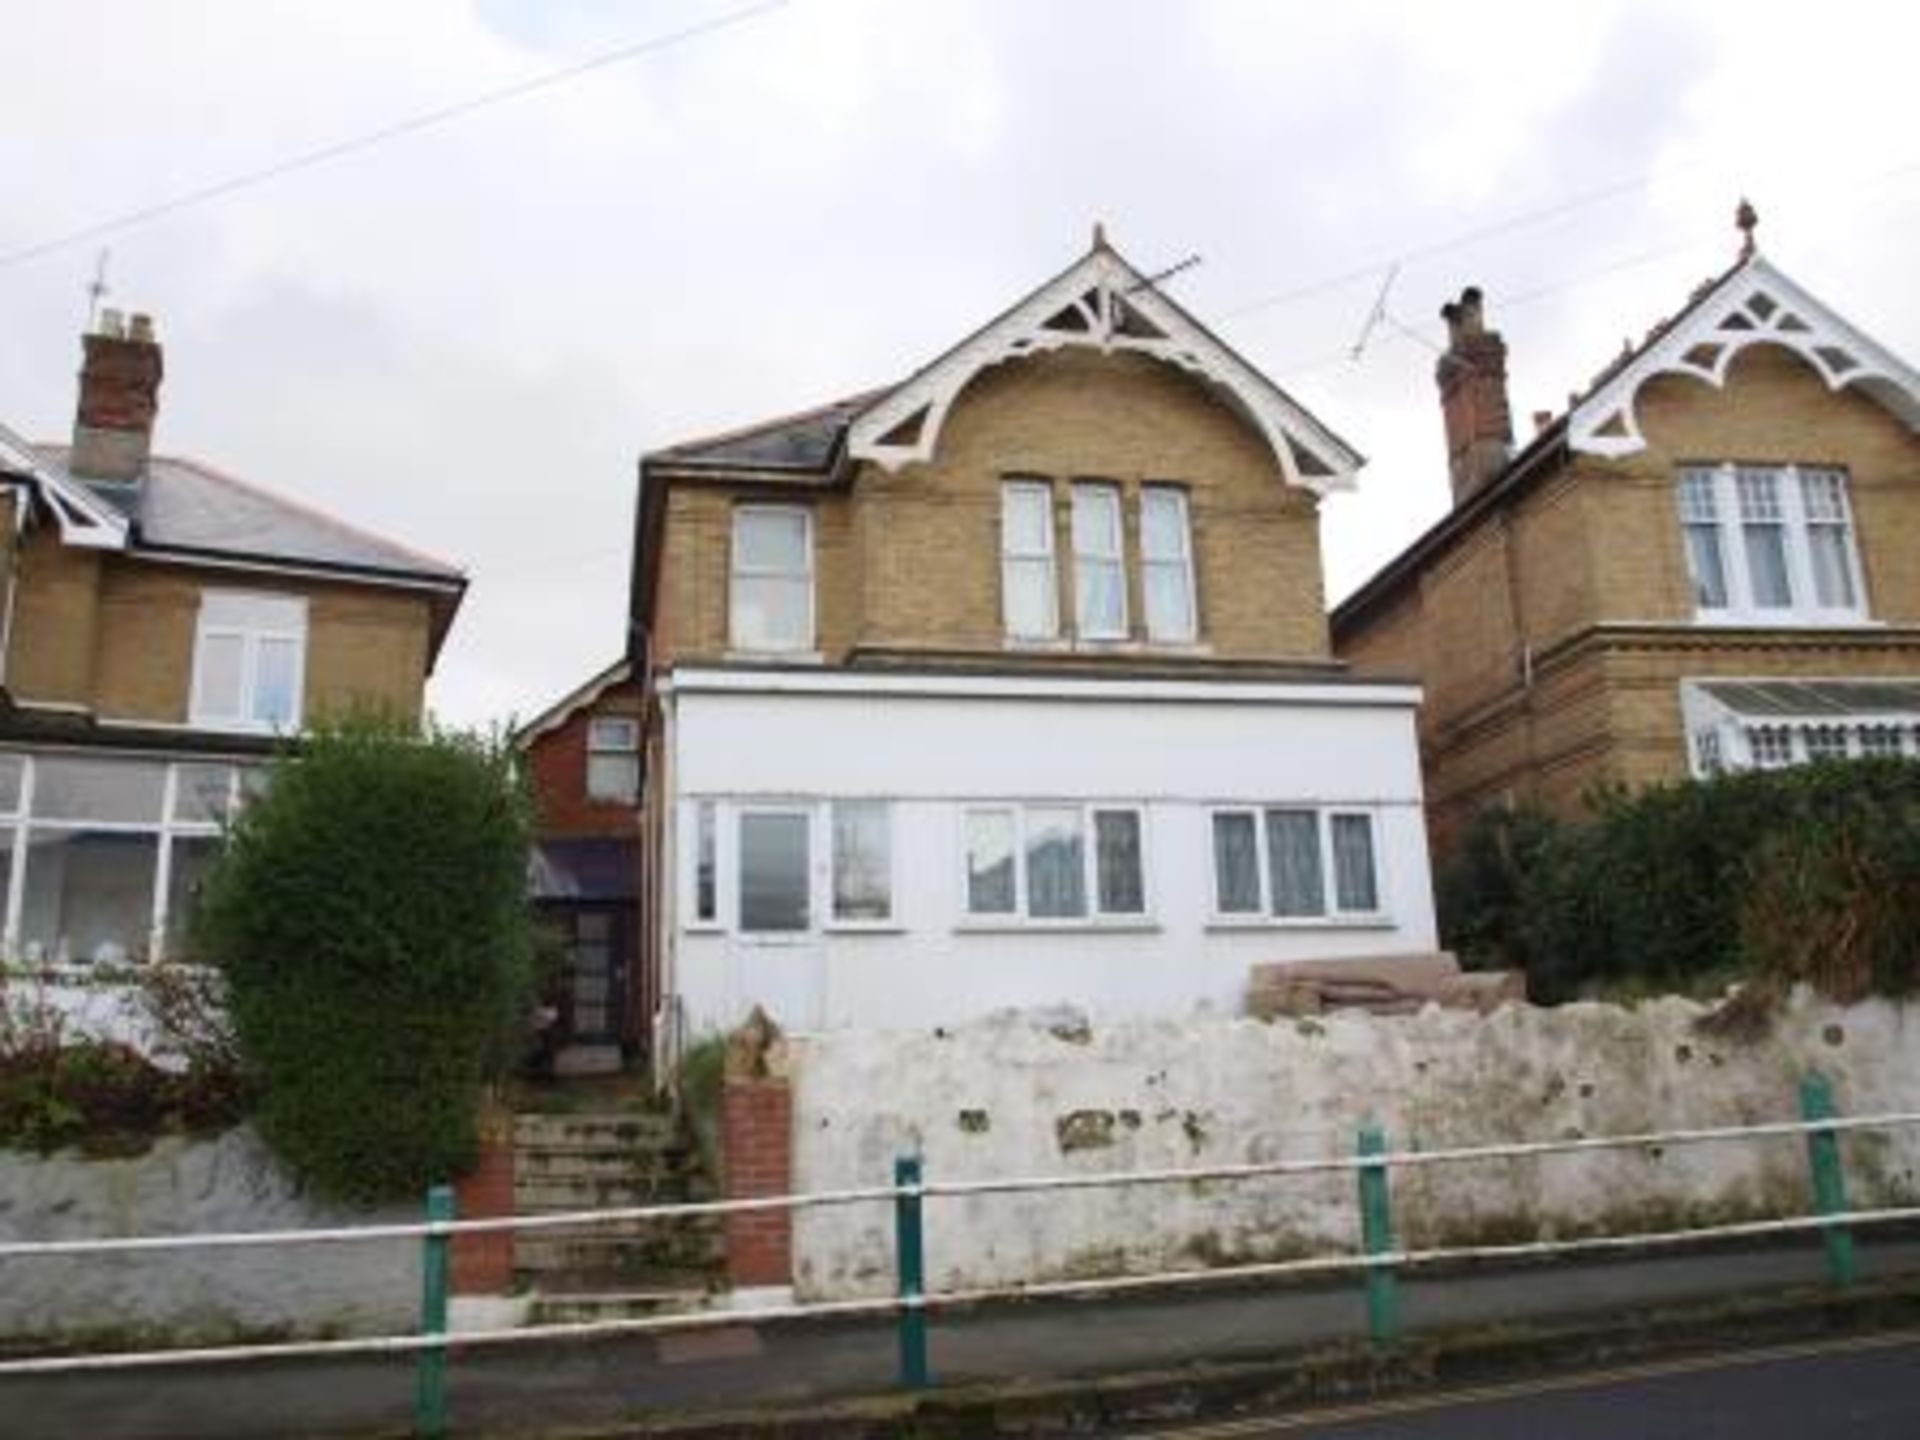 ISLE OF WIGHT - FREEHOLD DETACHED FOUR BEDROOM HMO AND SELF-CONTAINED FLAT